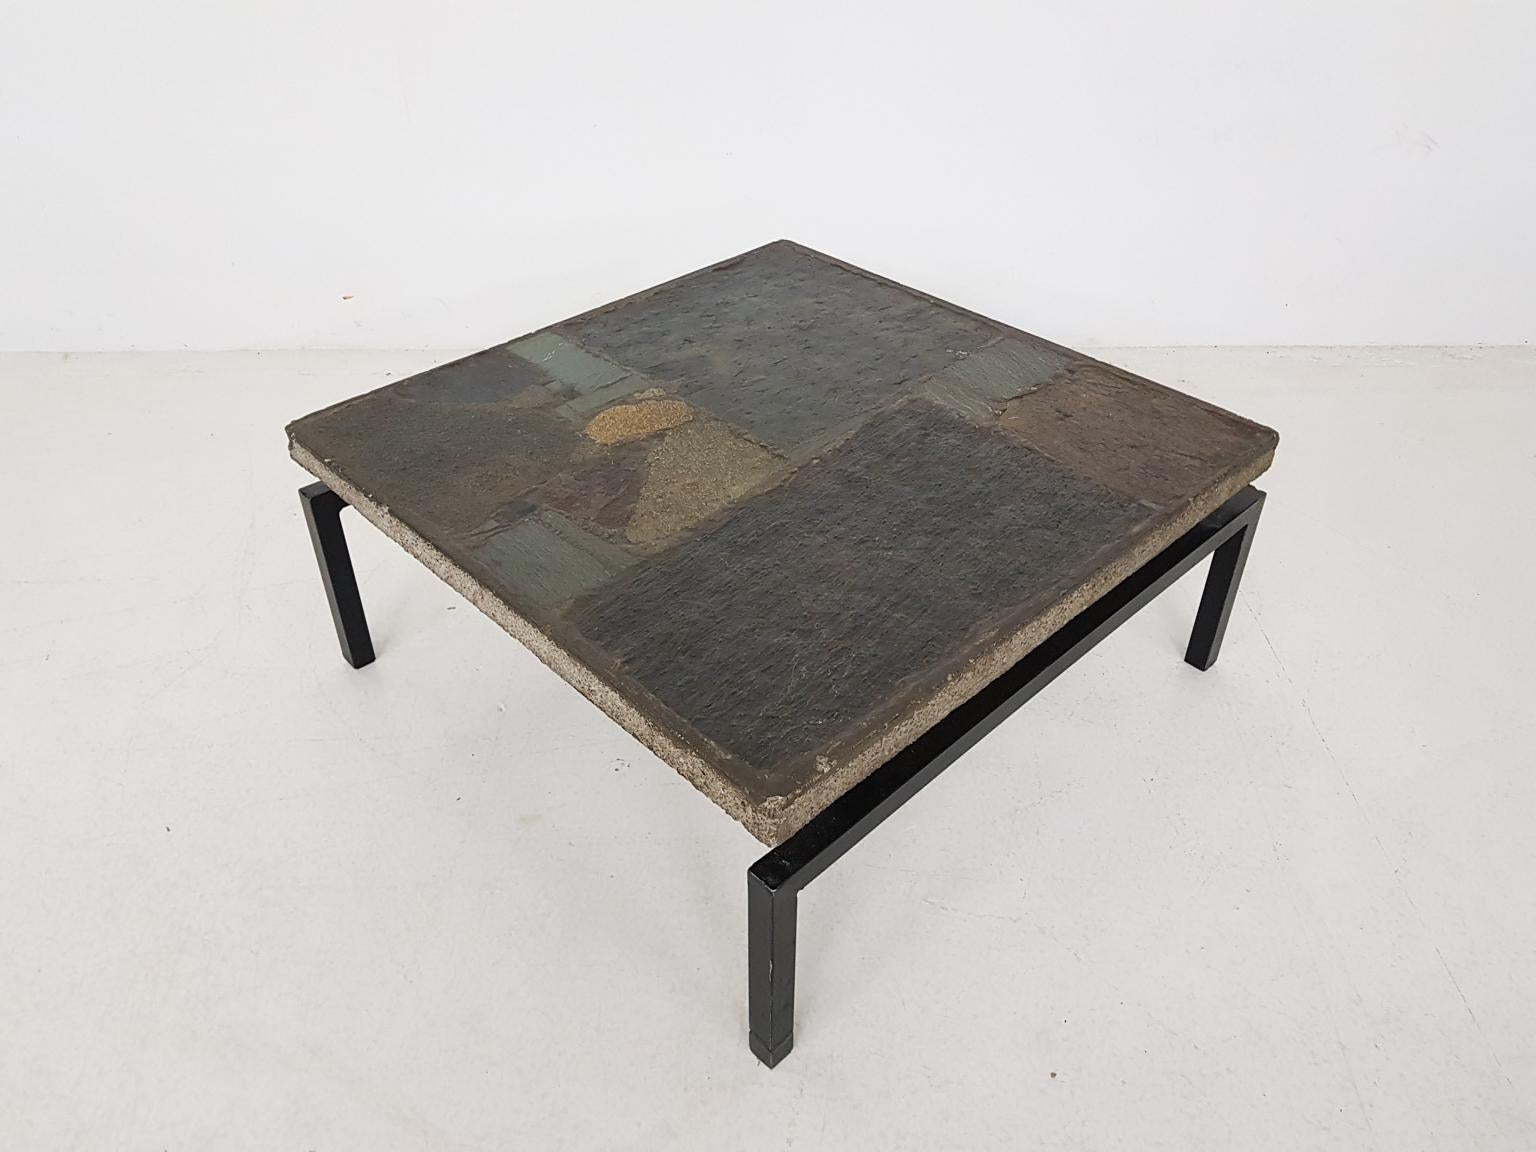 Impressive concrete coffee table on a black metal base with mosaic inlay by the Dutch sculptor Paul Kingma. Made in 1963 in the Netherlands.

Like all coffee tables made by Paul Kingma, this one is hand made with materials he carefully collected.